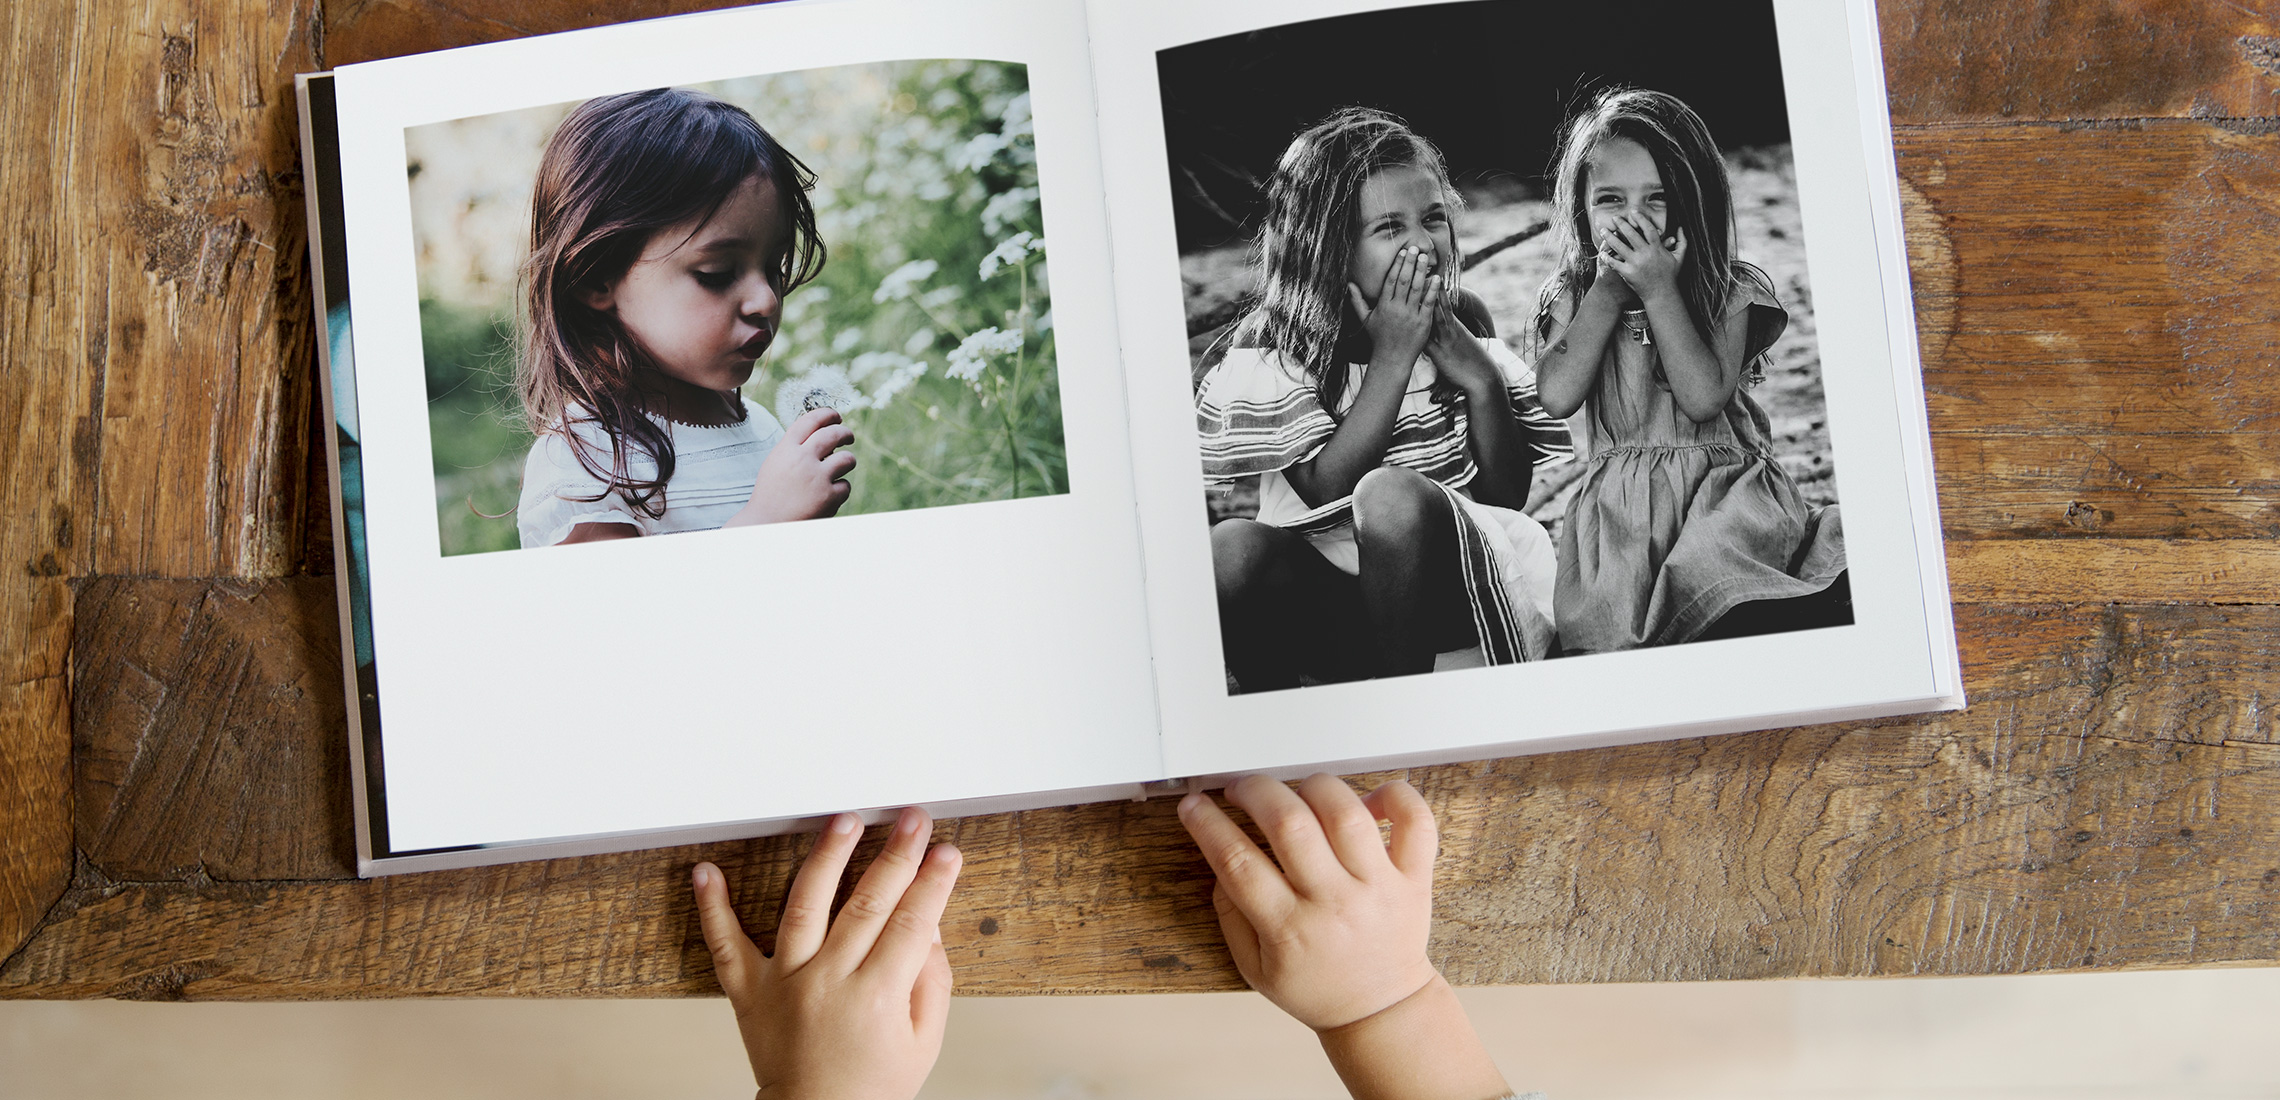 A young toddlers hands flipping through a square photo book with images of young girls laughing.